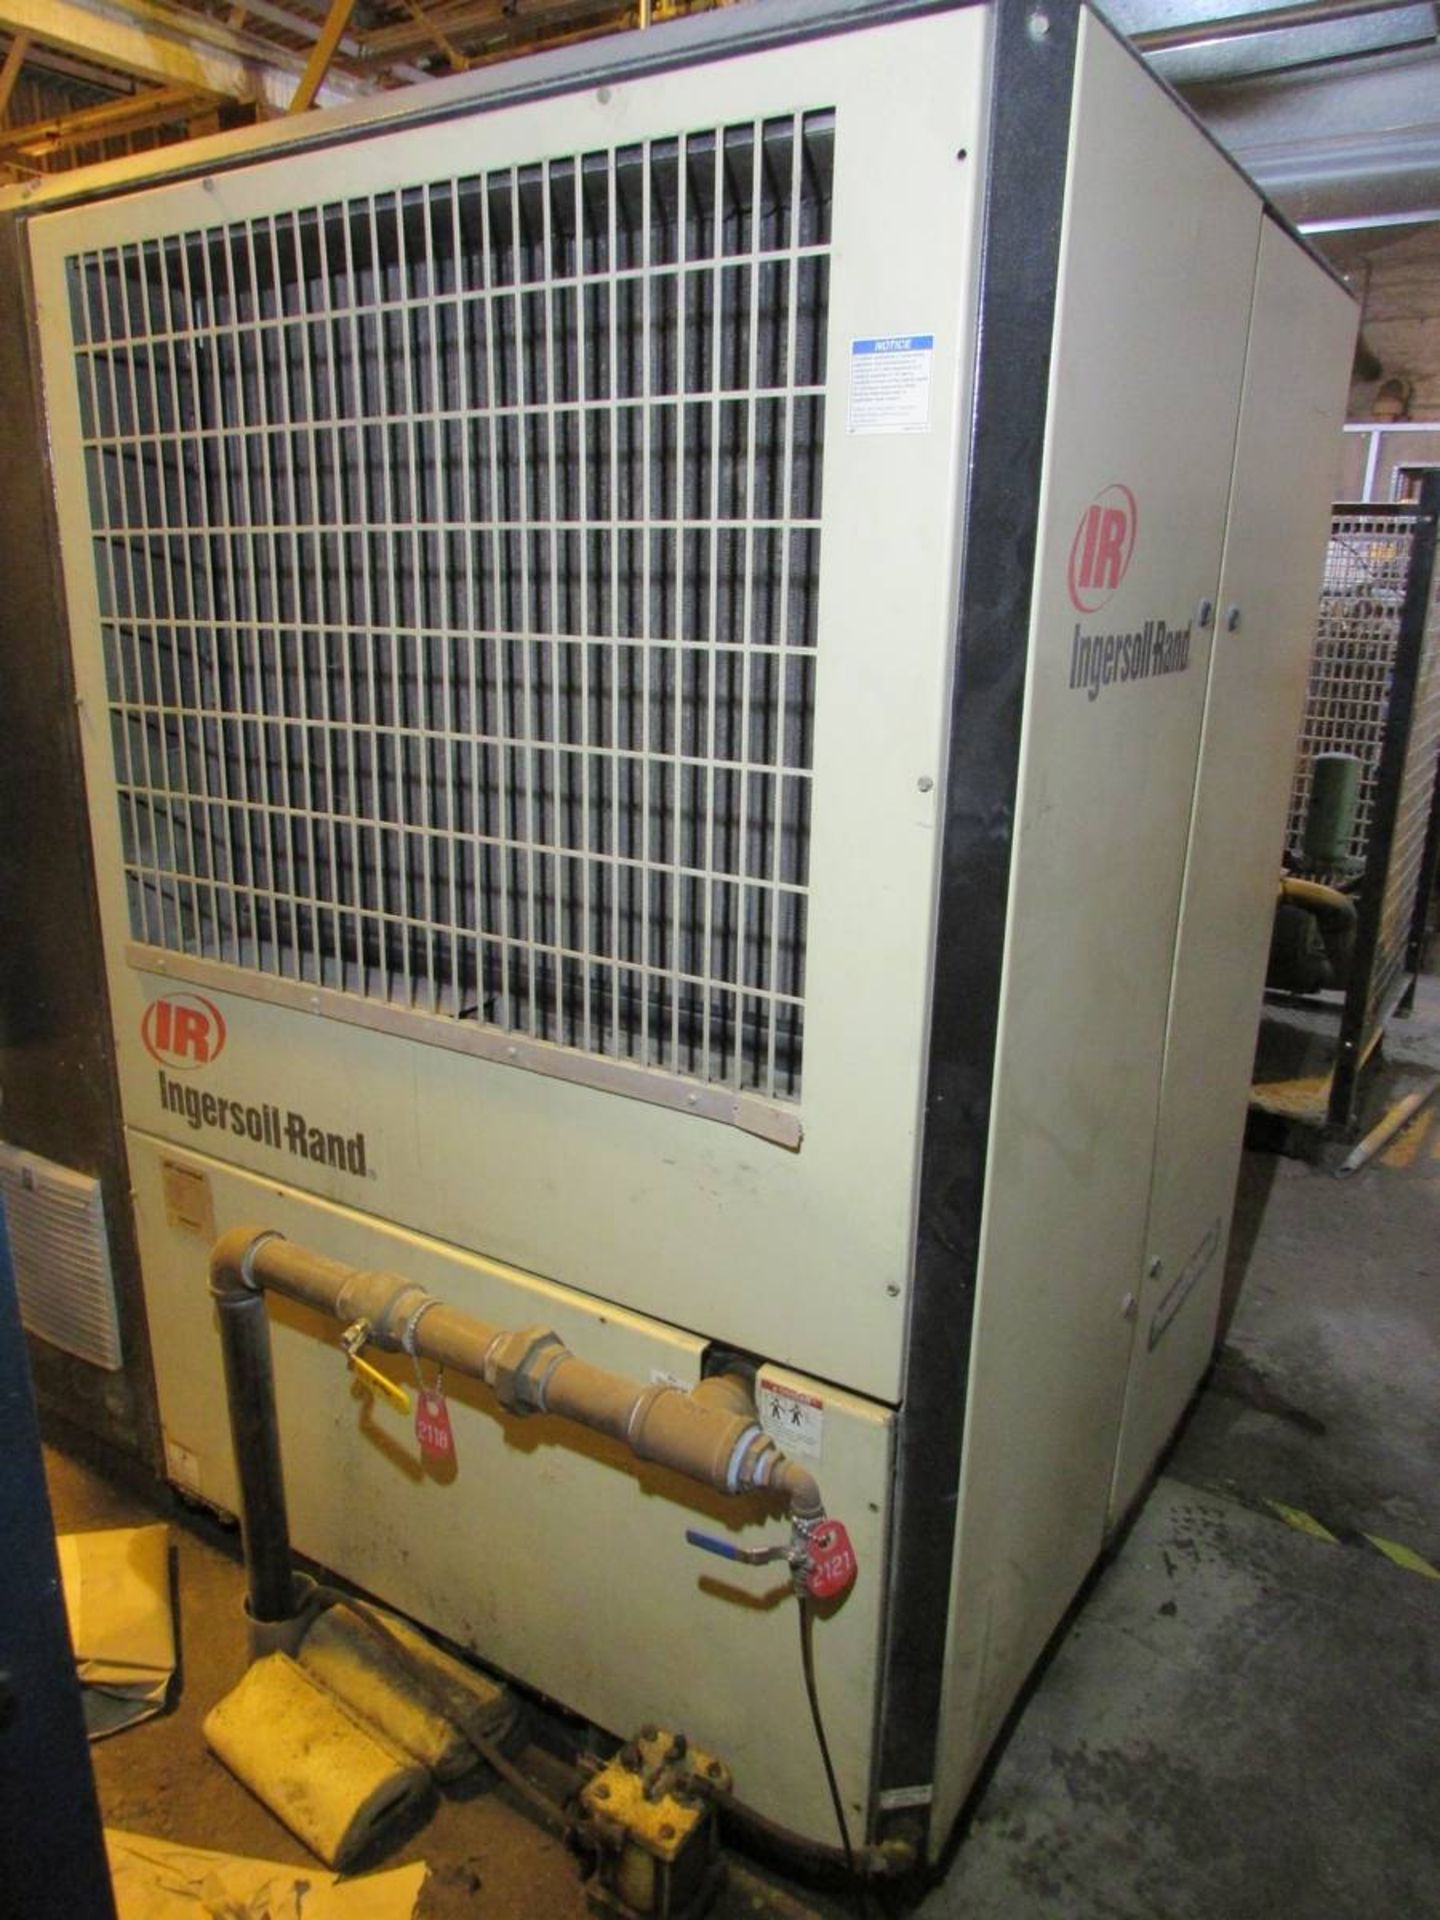 Ingersoll-Rand IRN100H-CC 100 HP Rotary Screw Air Compressor - Image 5 of 8